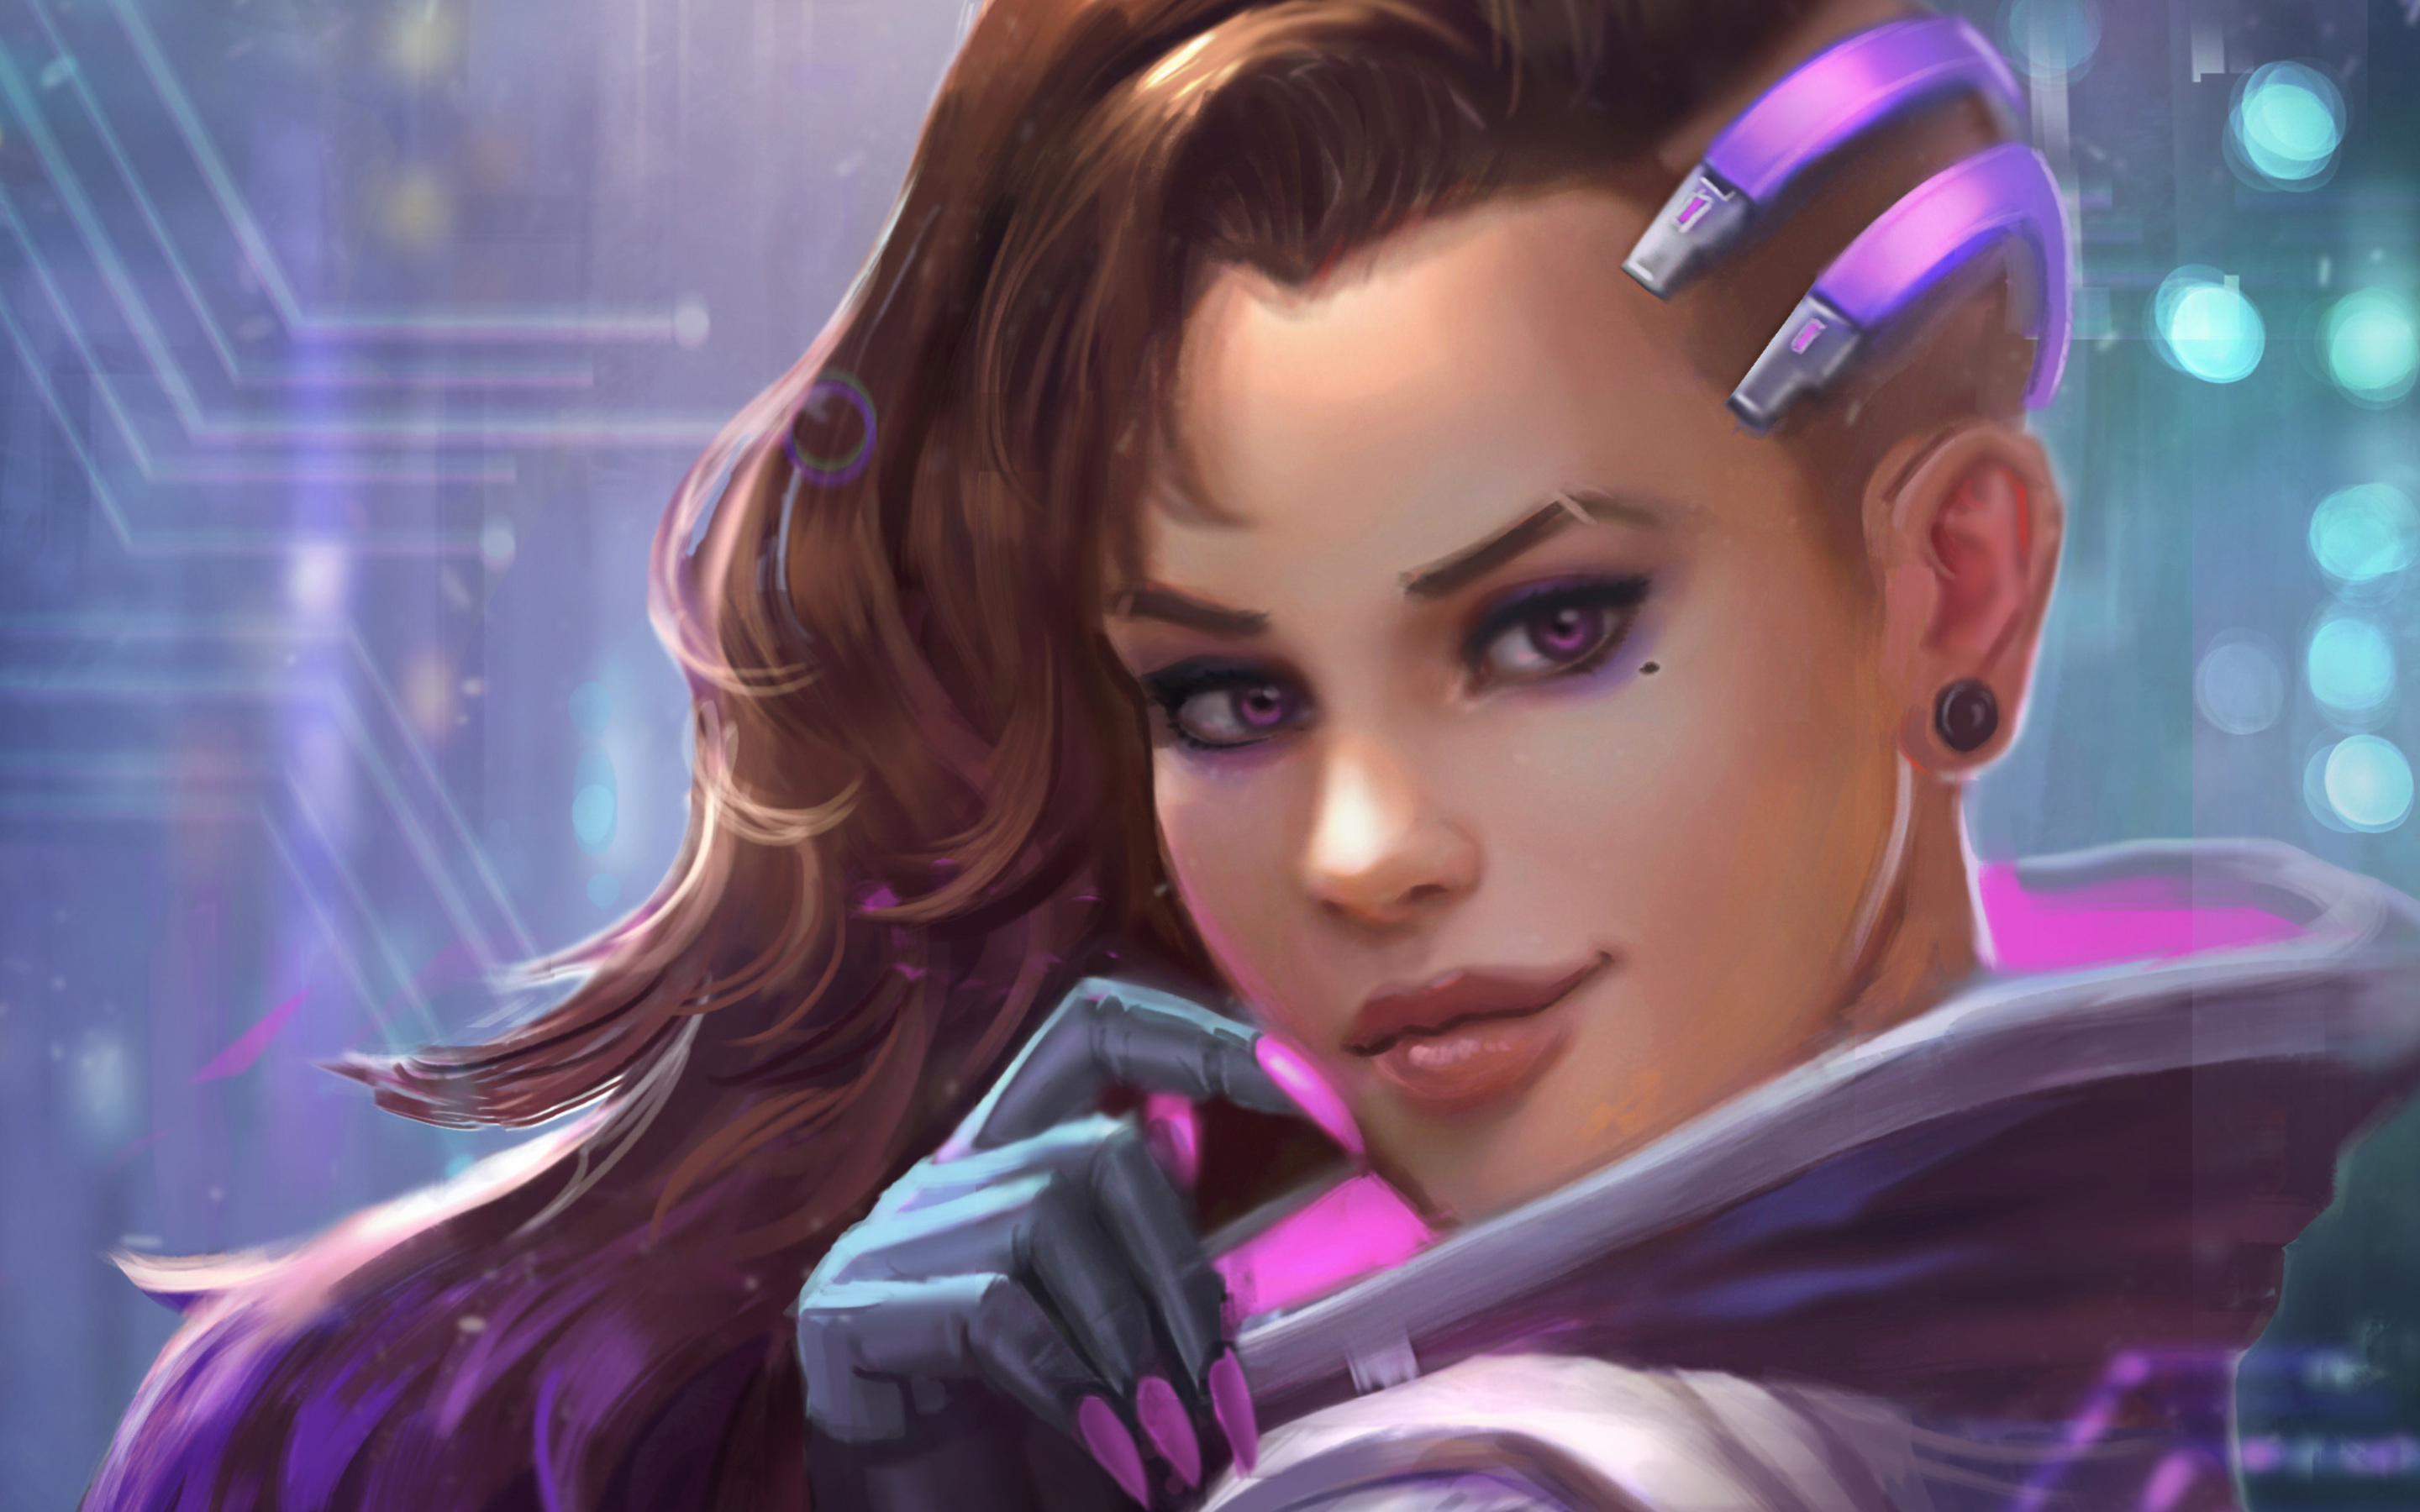 Download Wallpapers Sombra Portrait Cyber Warrior Art Overwatch For Desktop With Resolution 2880x1800 High Quality Hd Pictures Wallpapers